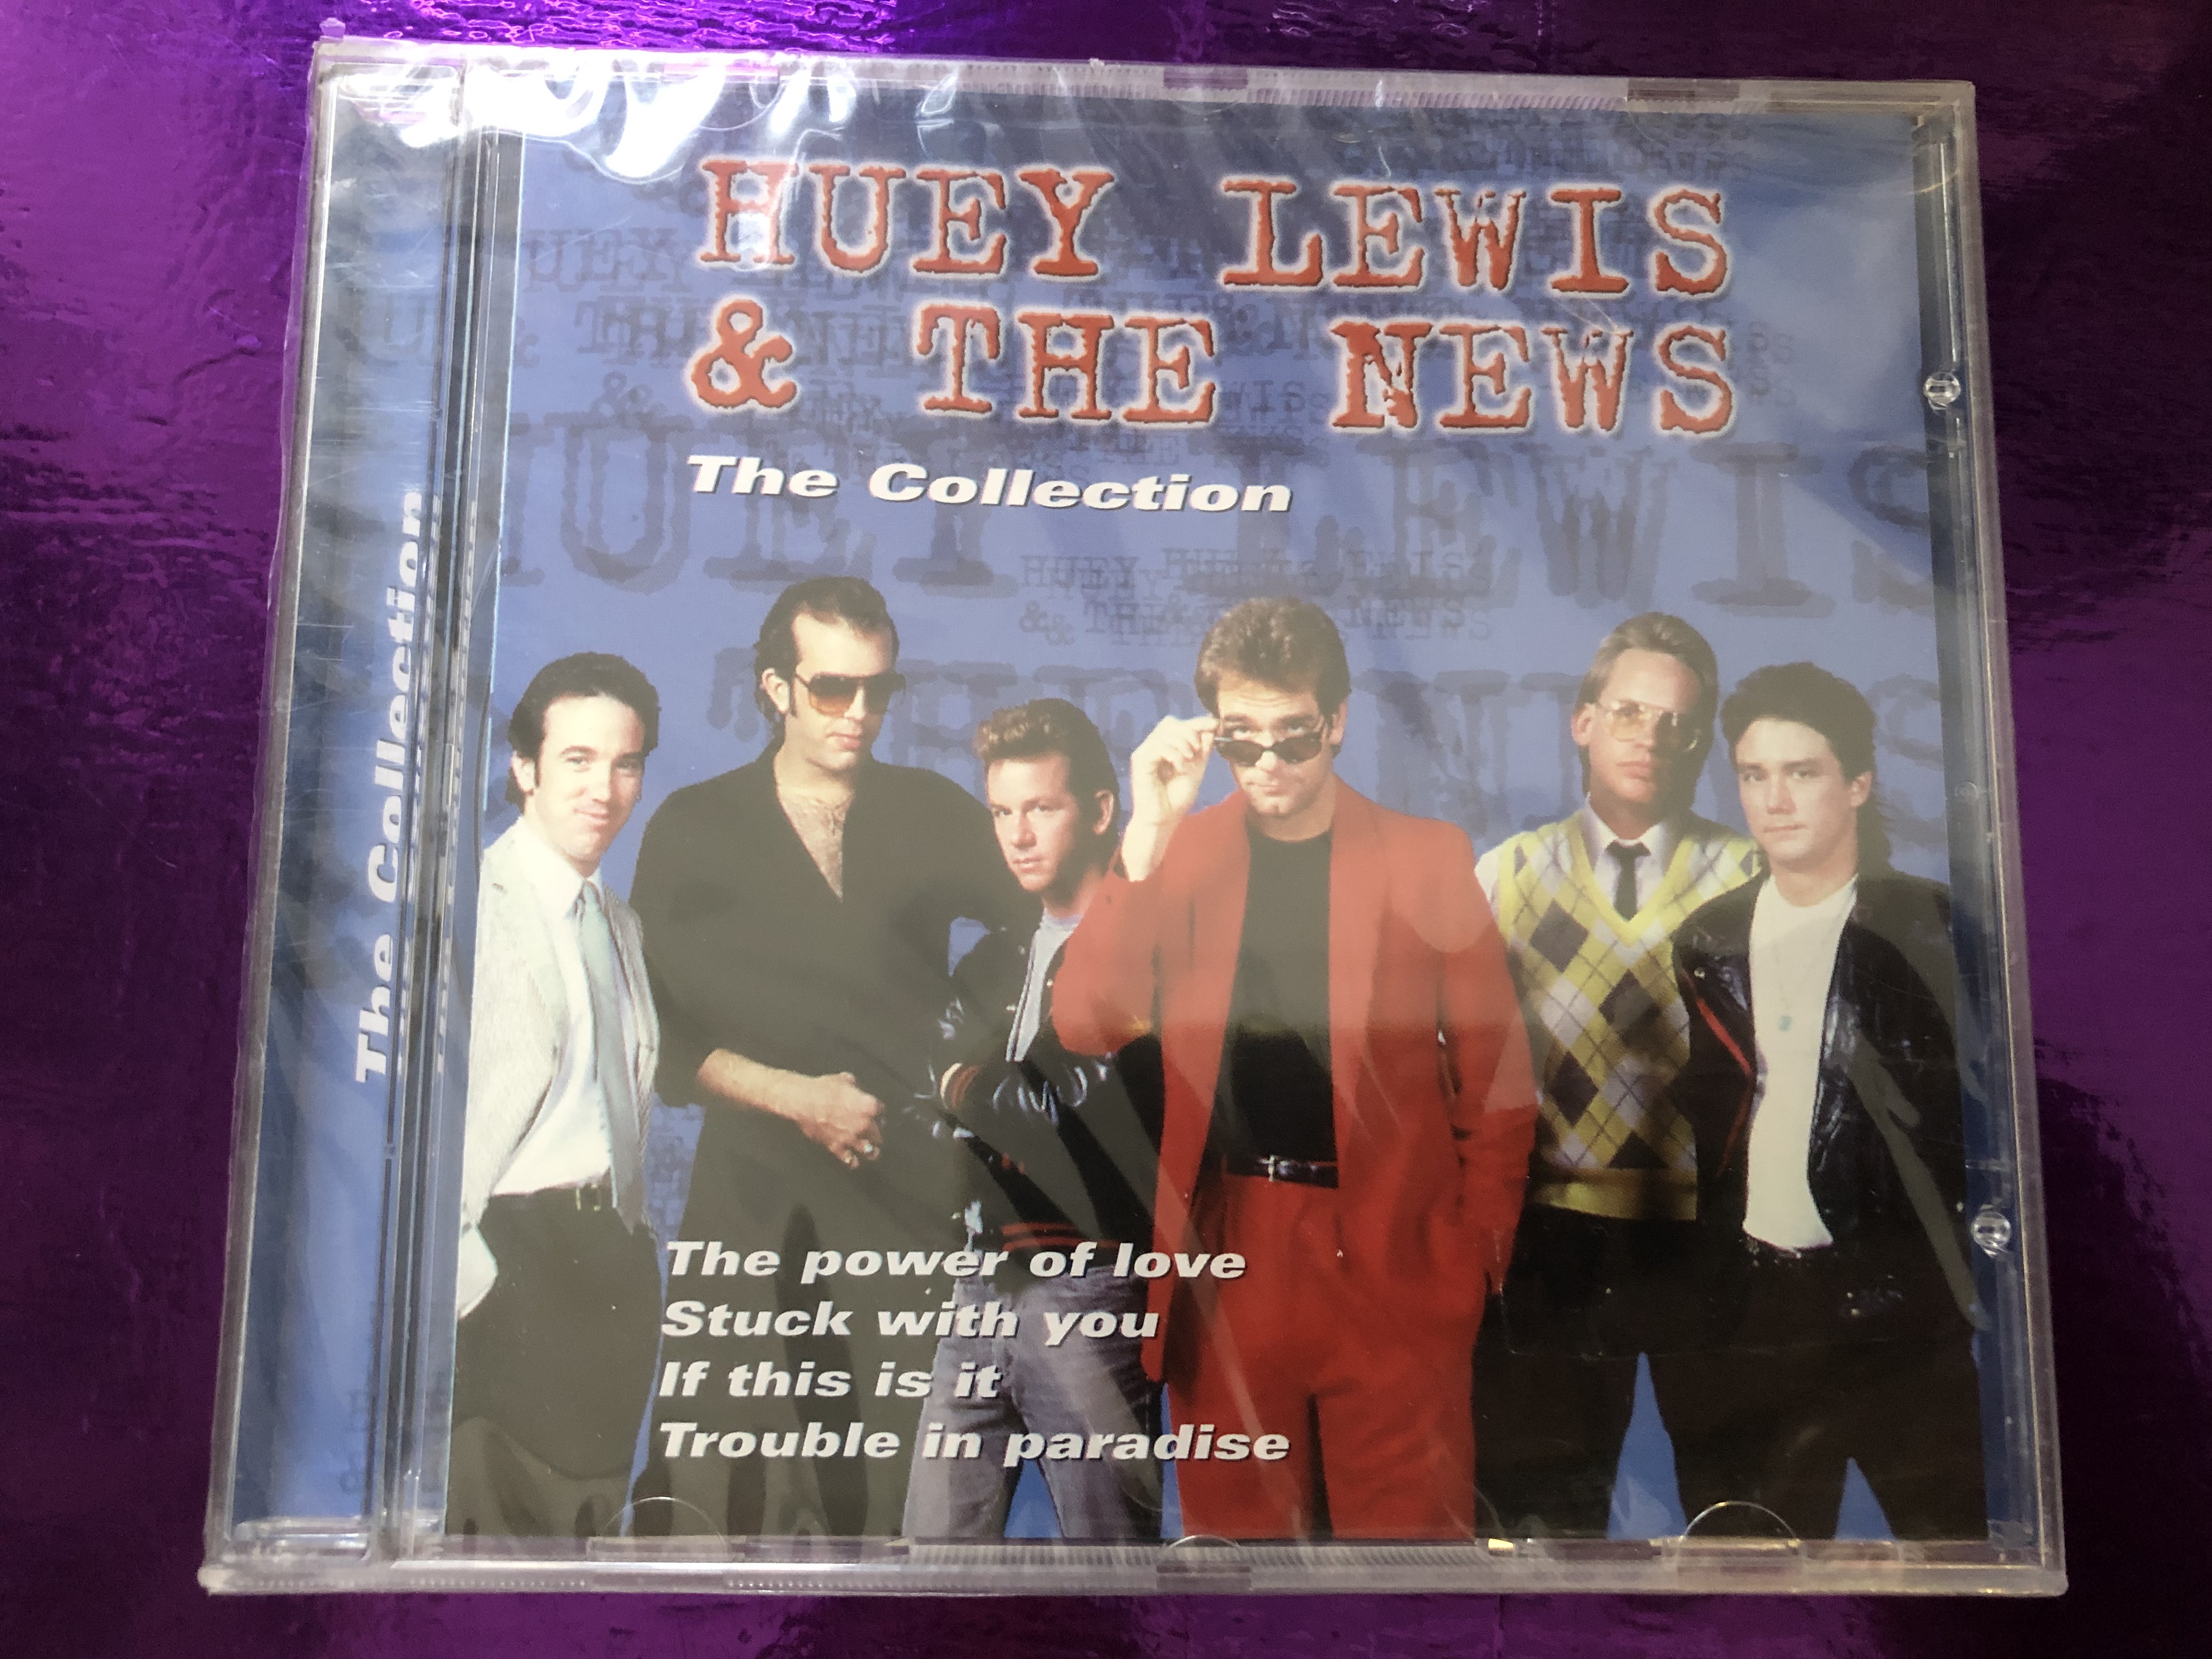 huey-lewis-the-news-the-collection-the-power-of-love-stuck-with-you-if-this-is-it-trouble-in-paradise-disky-audio-cd-2000-si-998132-1-.jpg